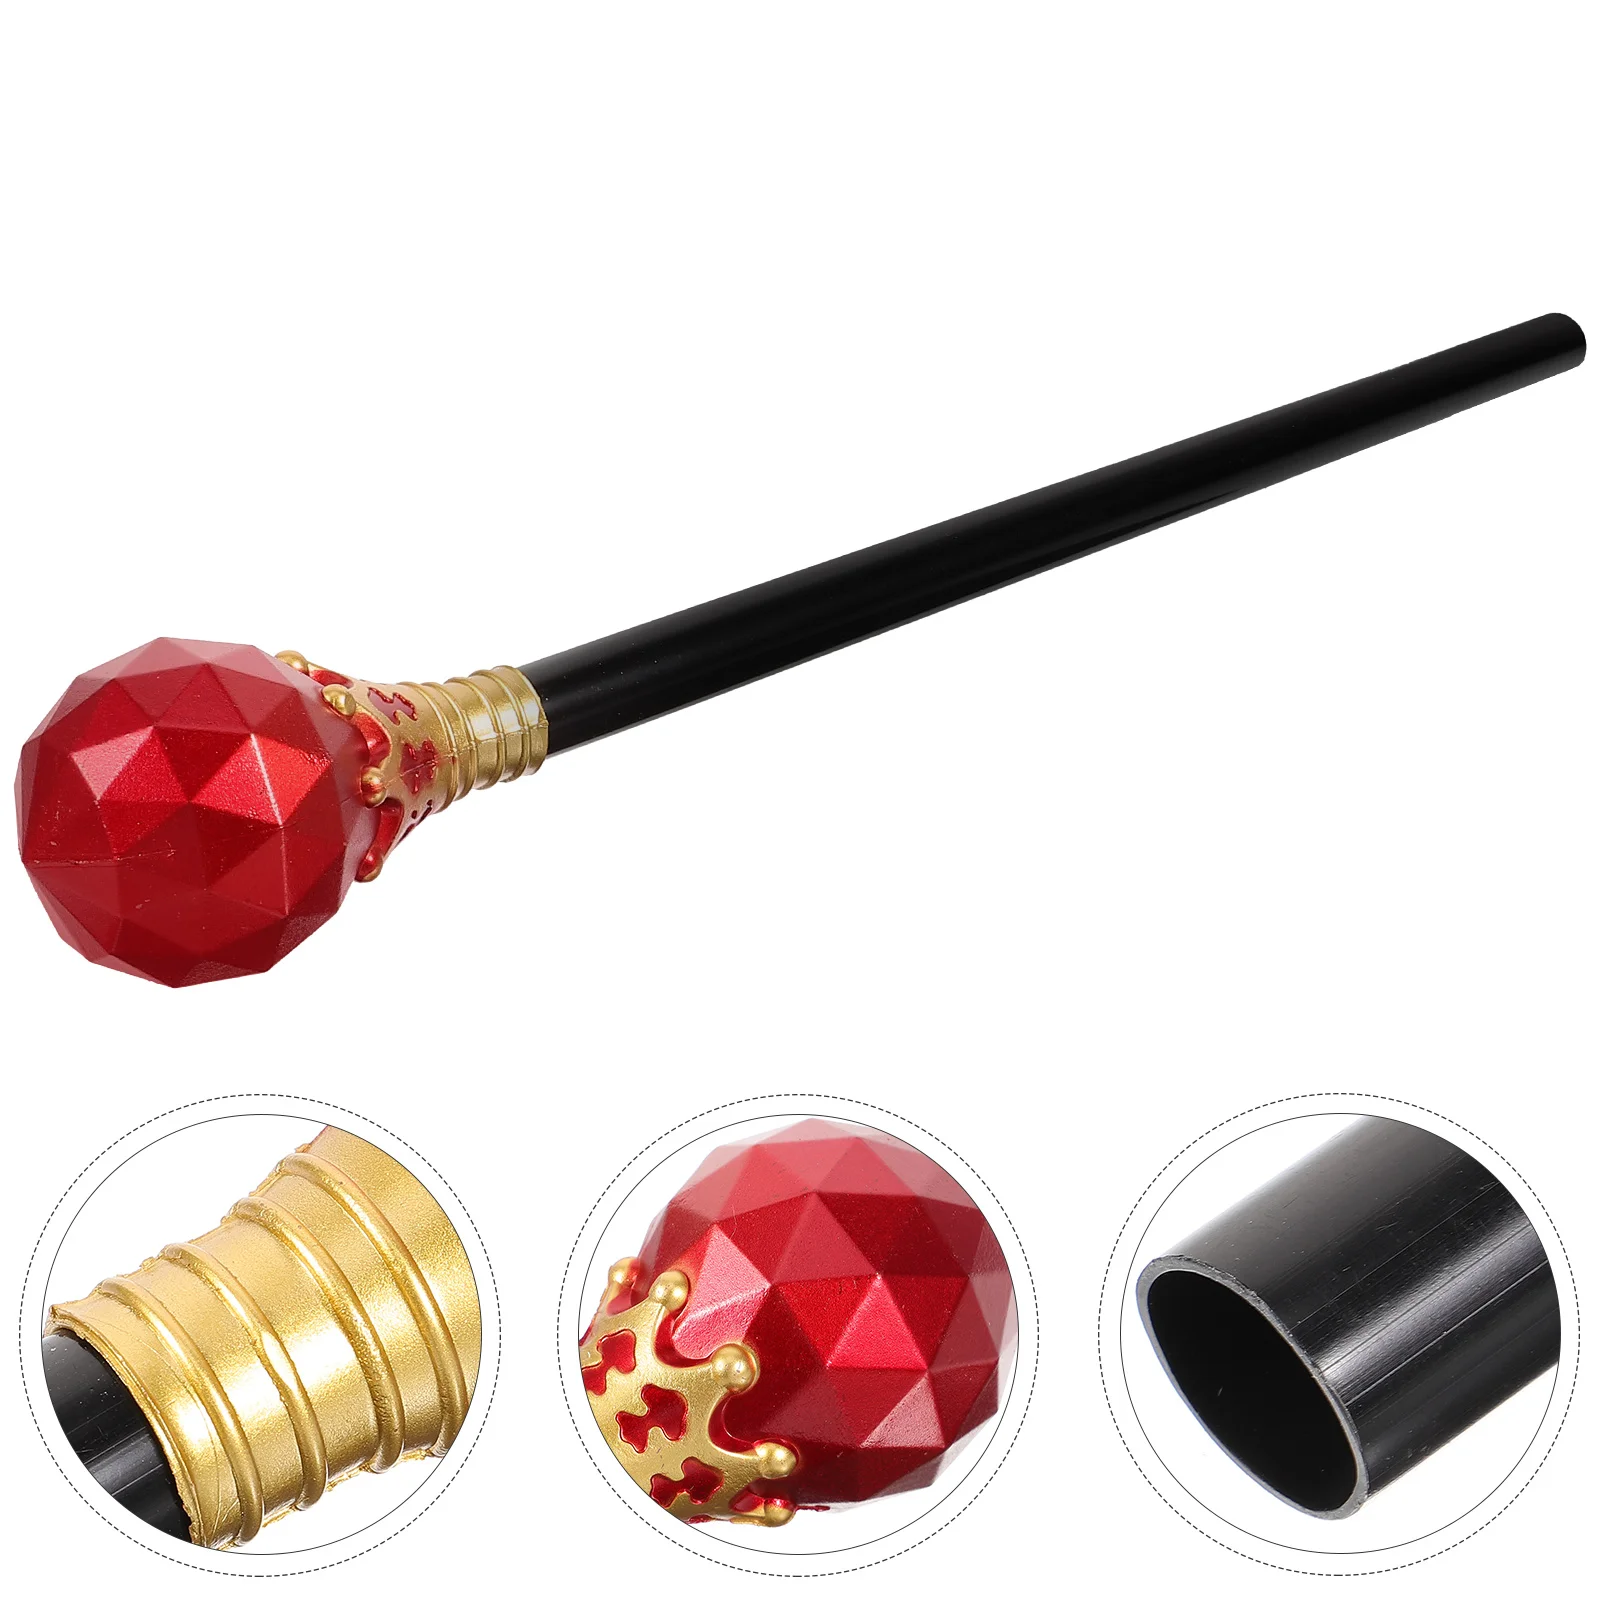 

King Scepter Kids King Queen Scepter Wand Funny Cane Stick Uk King Costume Birthday Halloween Party Dress Up Role